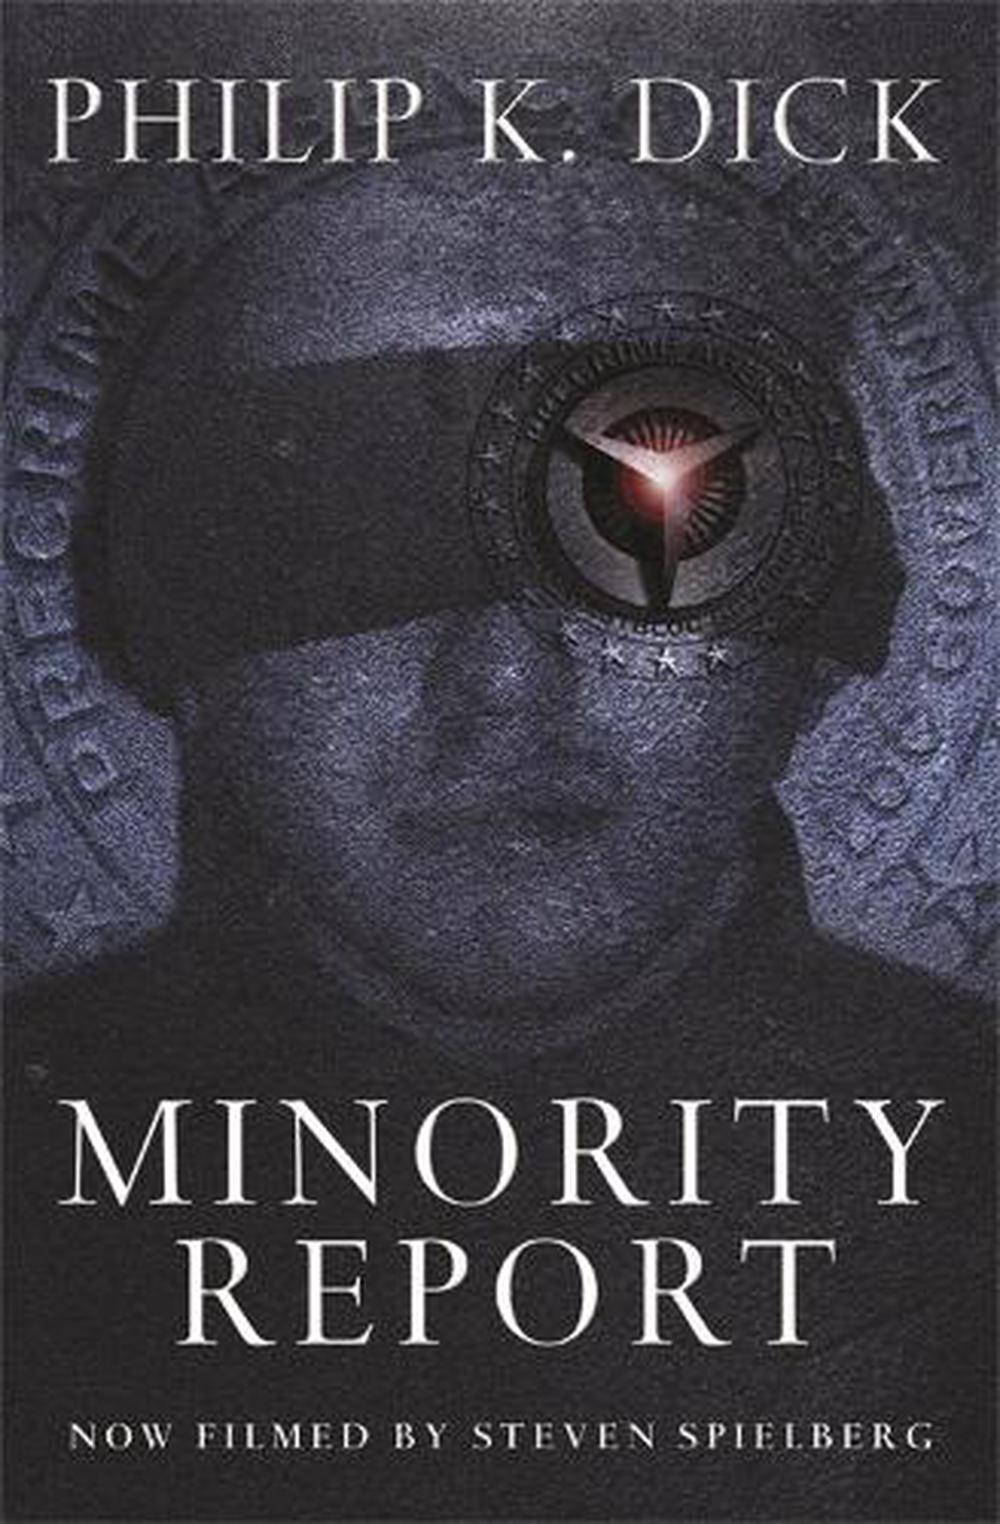 the minority report full text